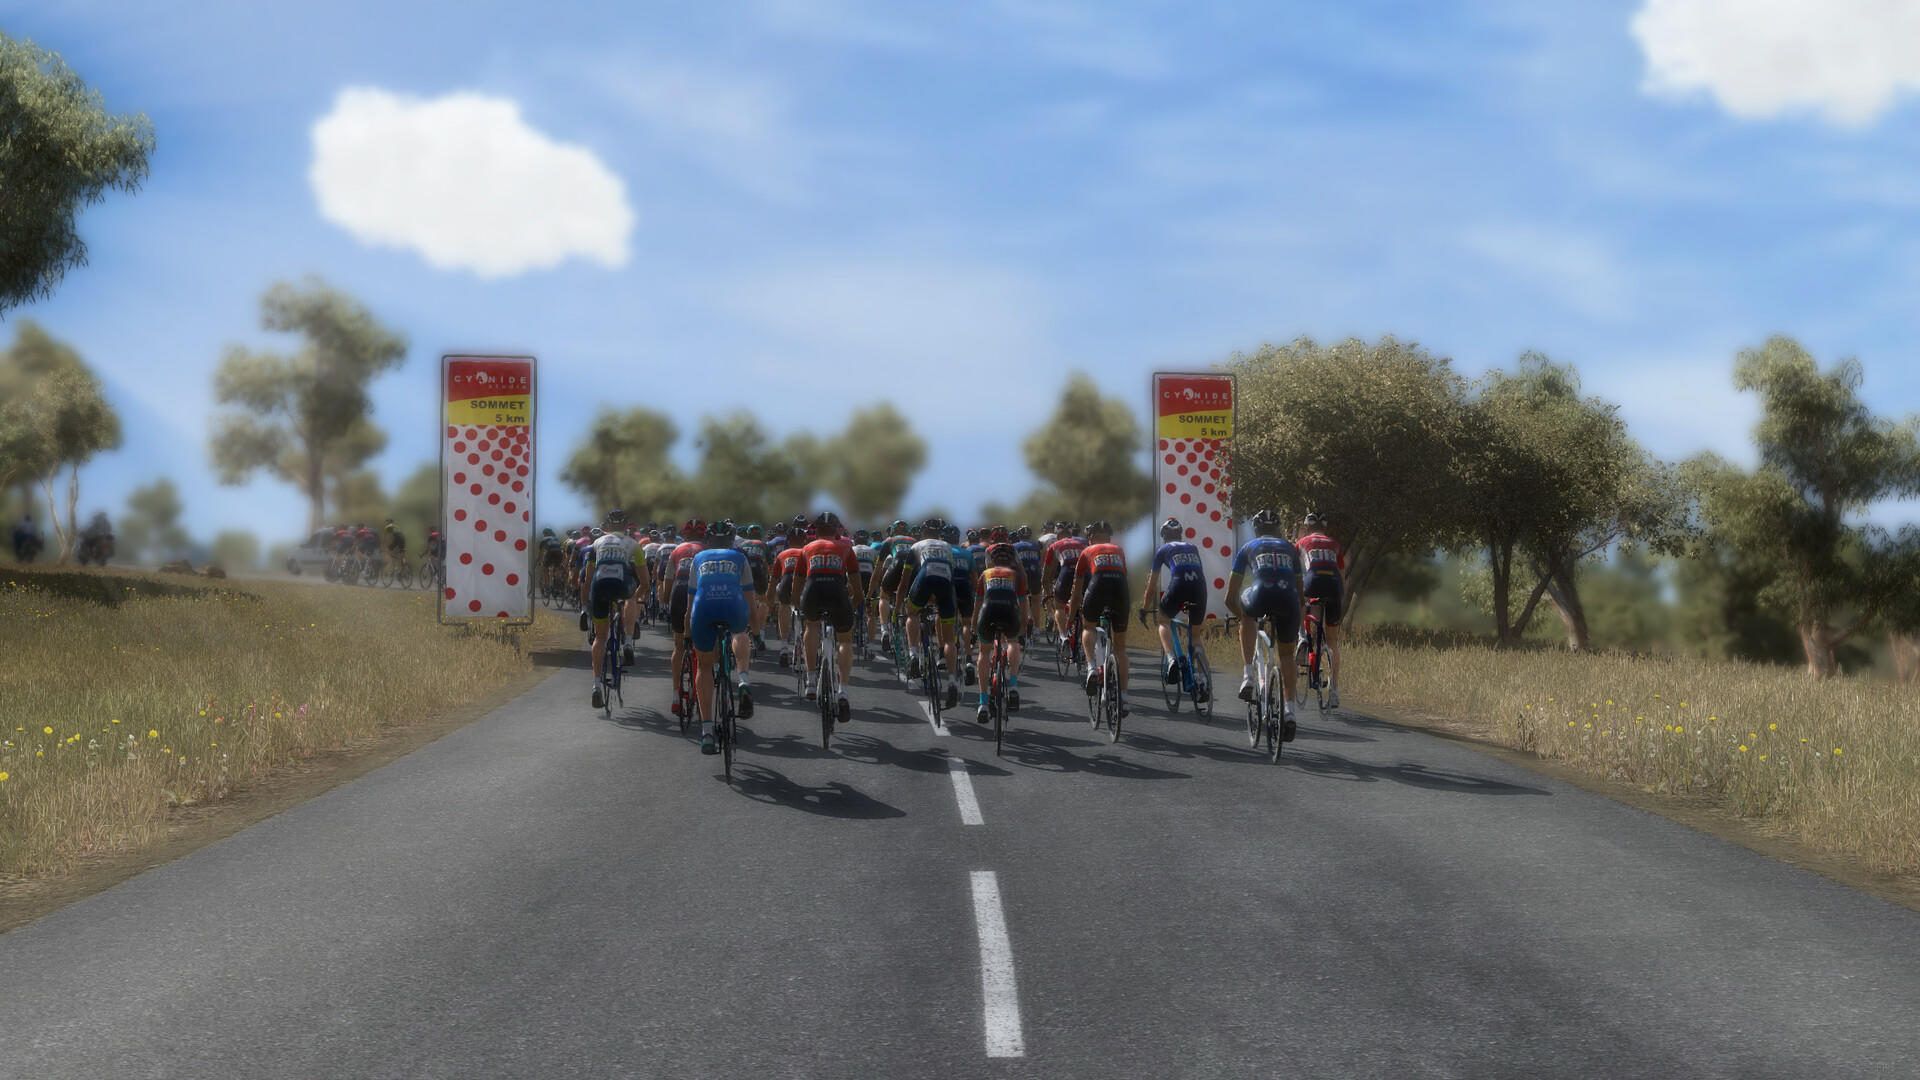 🚴 Best Cycling Manager Simulation Games and Apps